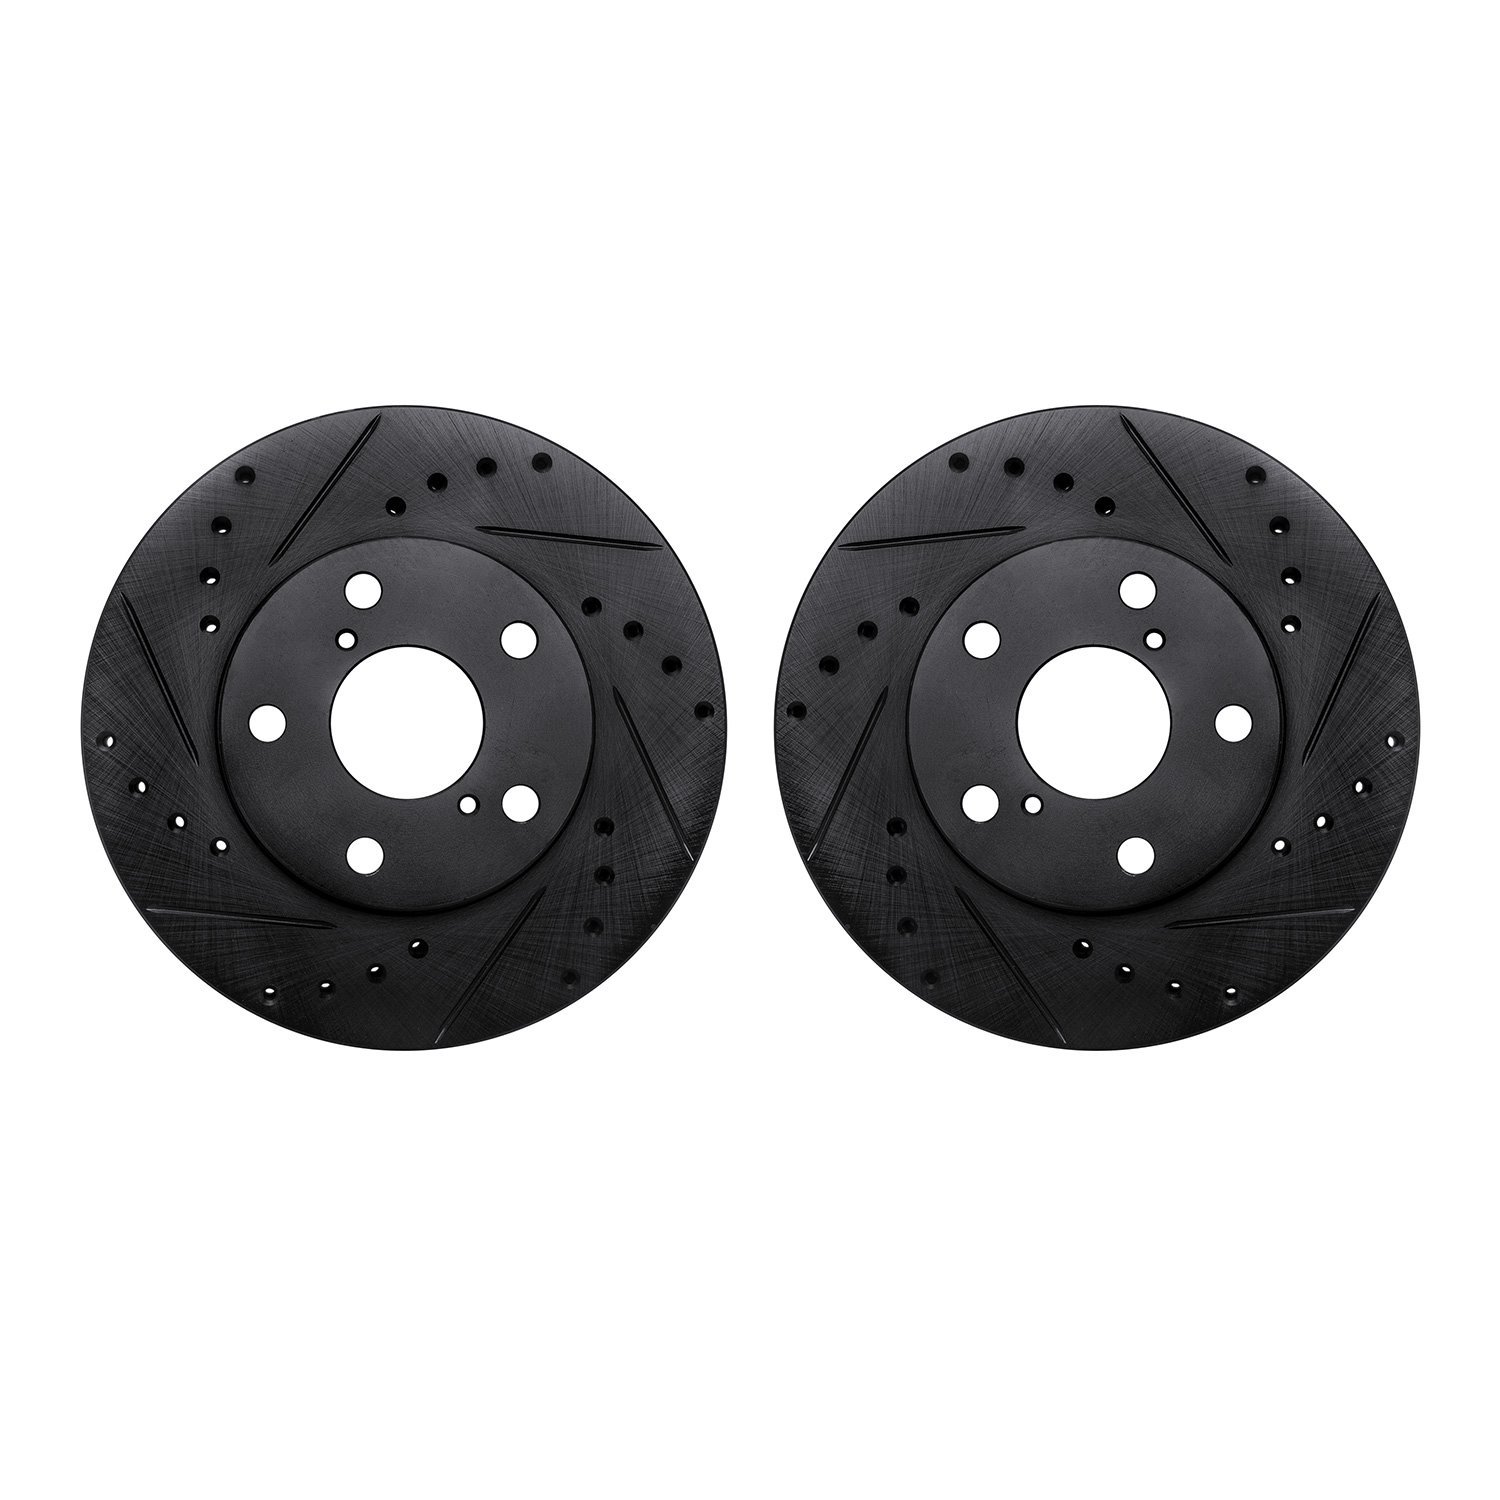 8002-75019 Drilled/Slotted Brake Rotors [Black], 1992-1998 Lexus/Toyota/Scion, Position: Front